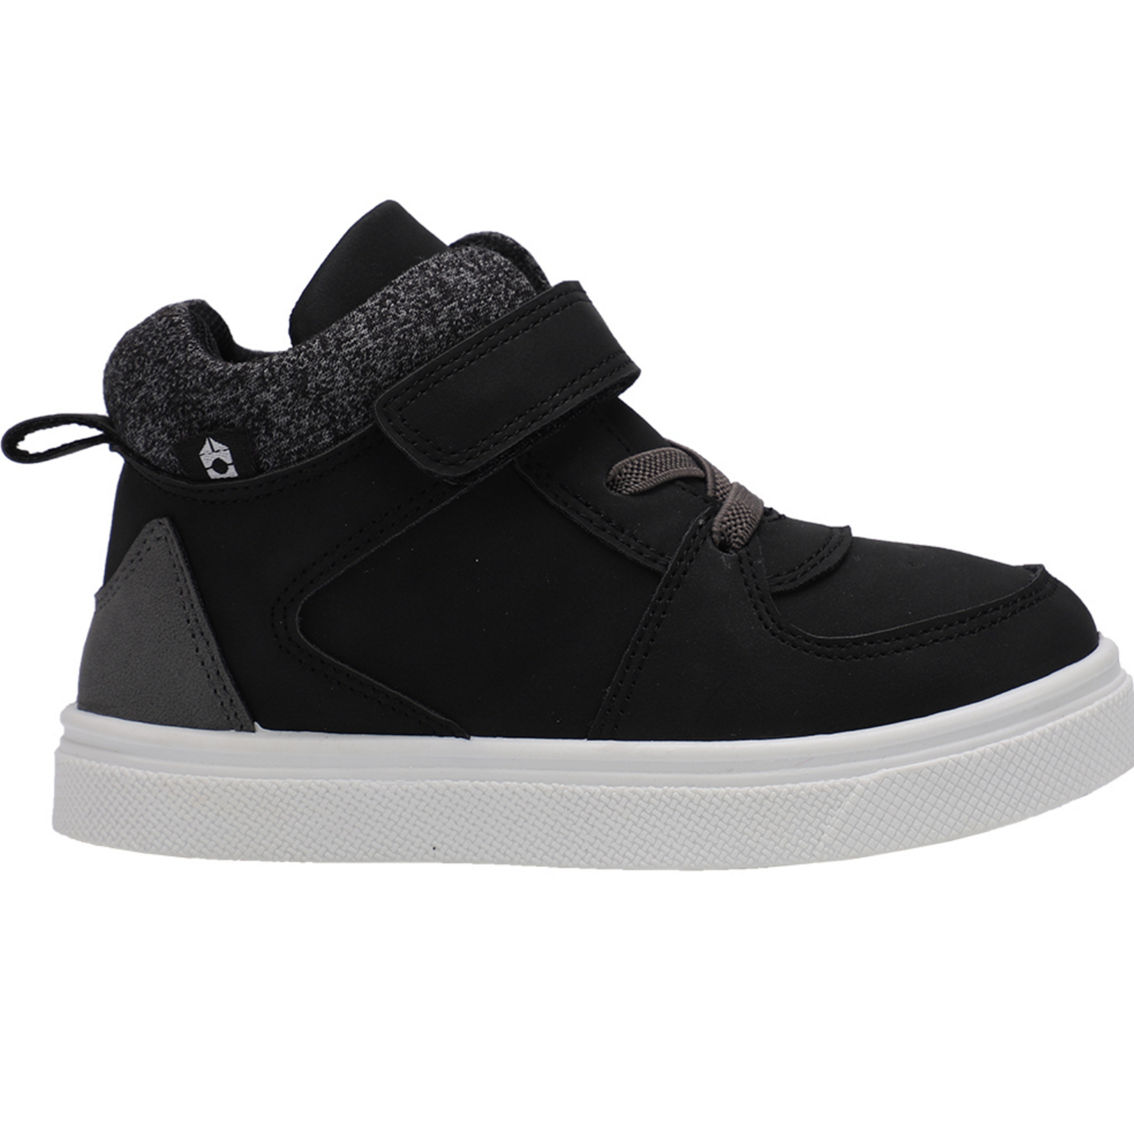 Oomphies Toddler Boys Jax High Top Shoes - Image 3 of 4